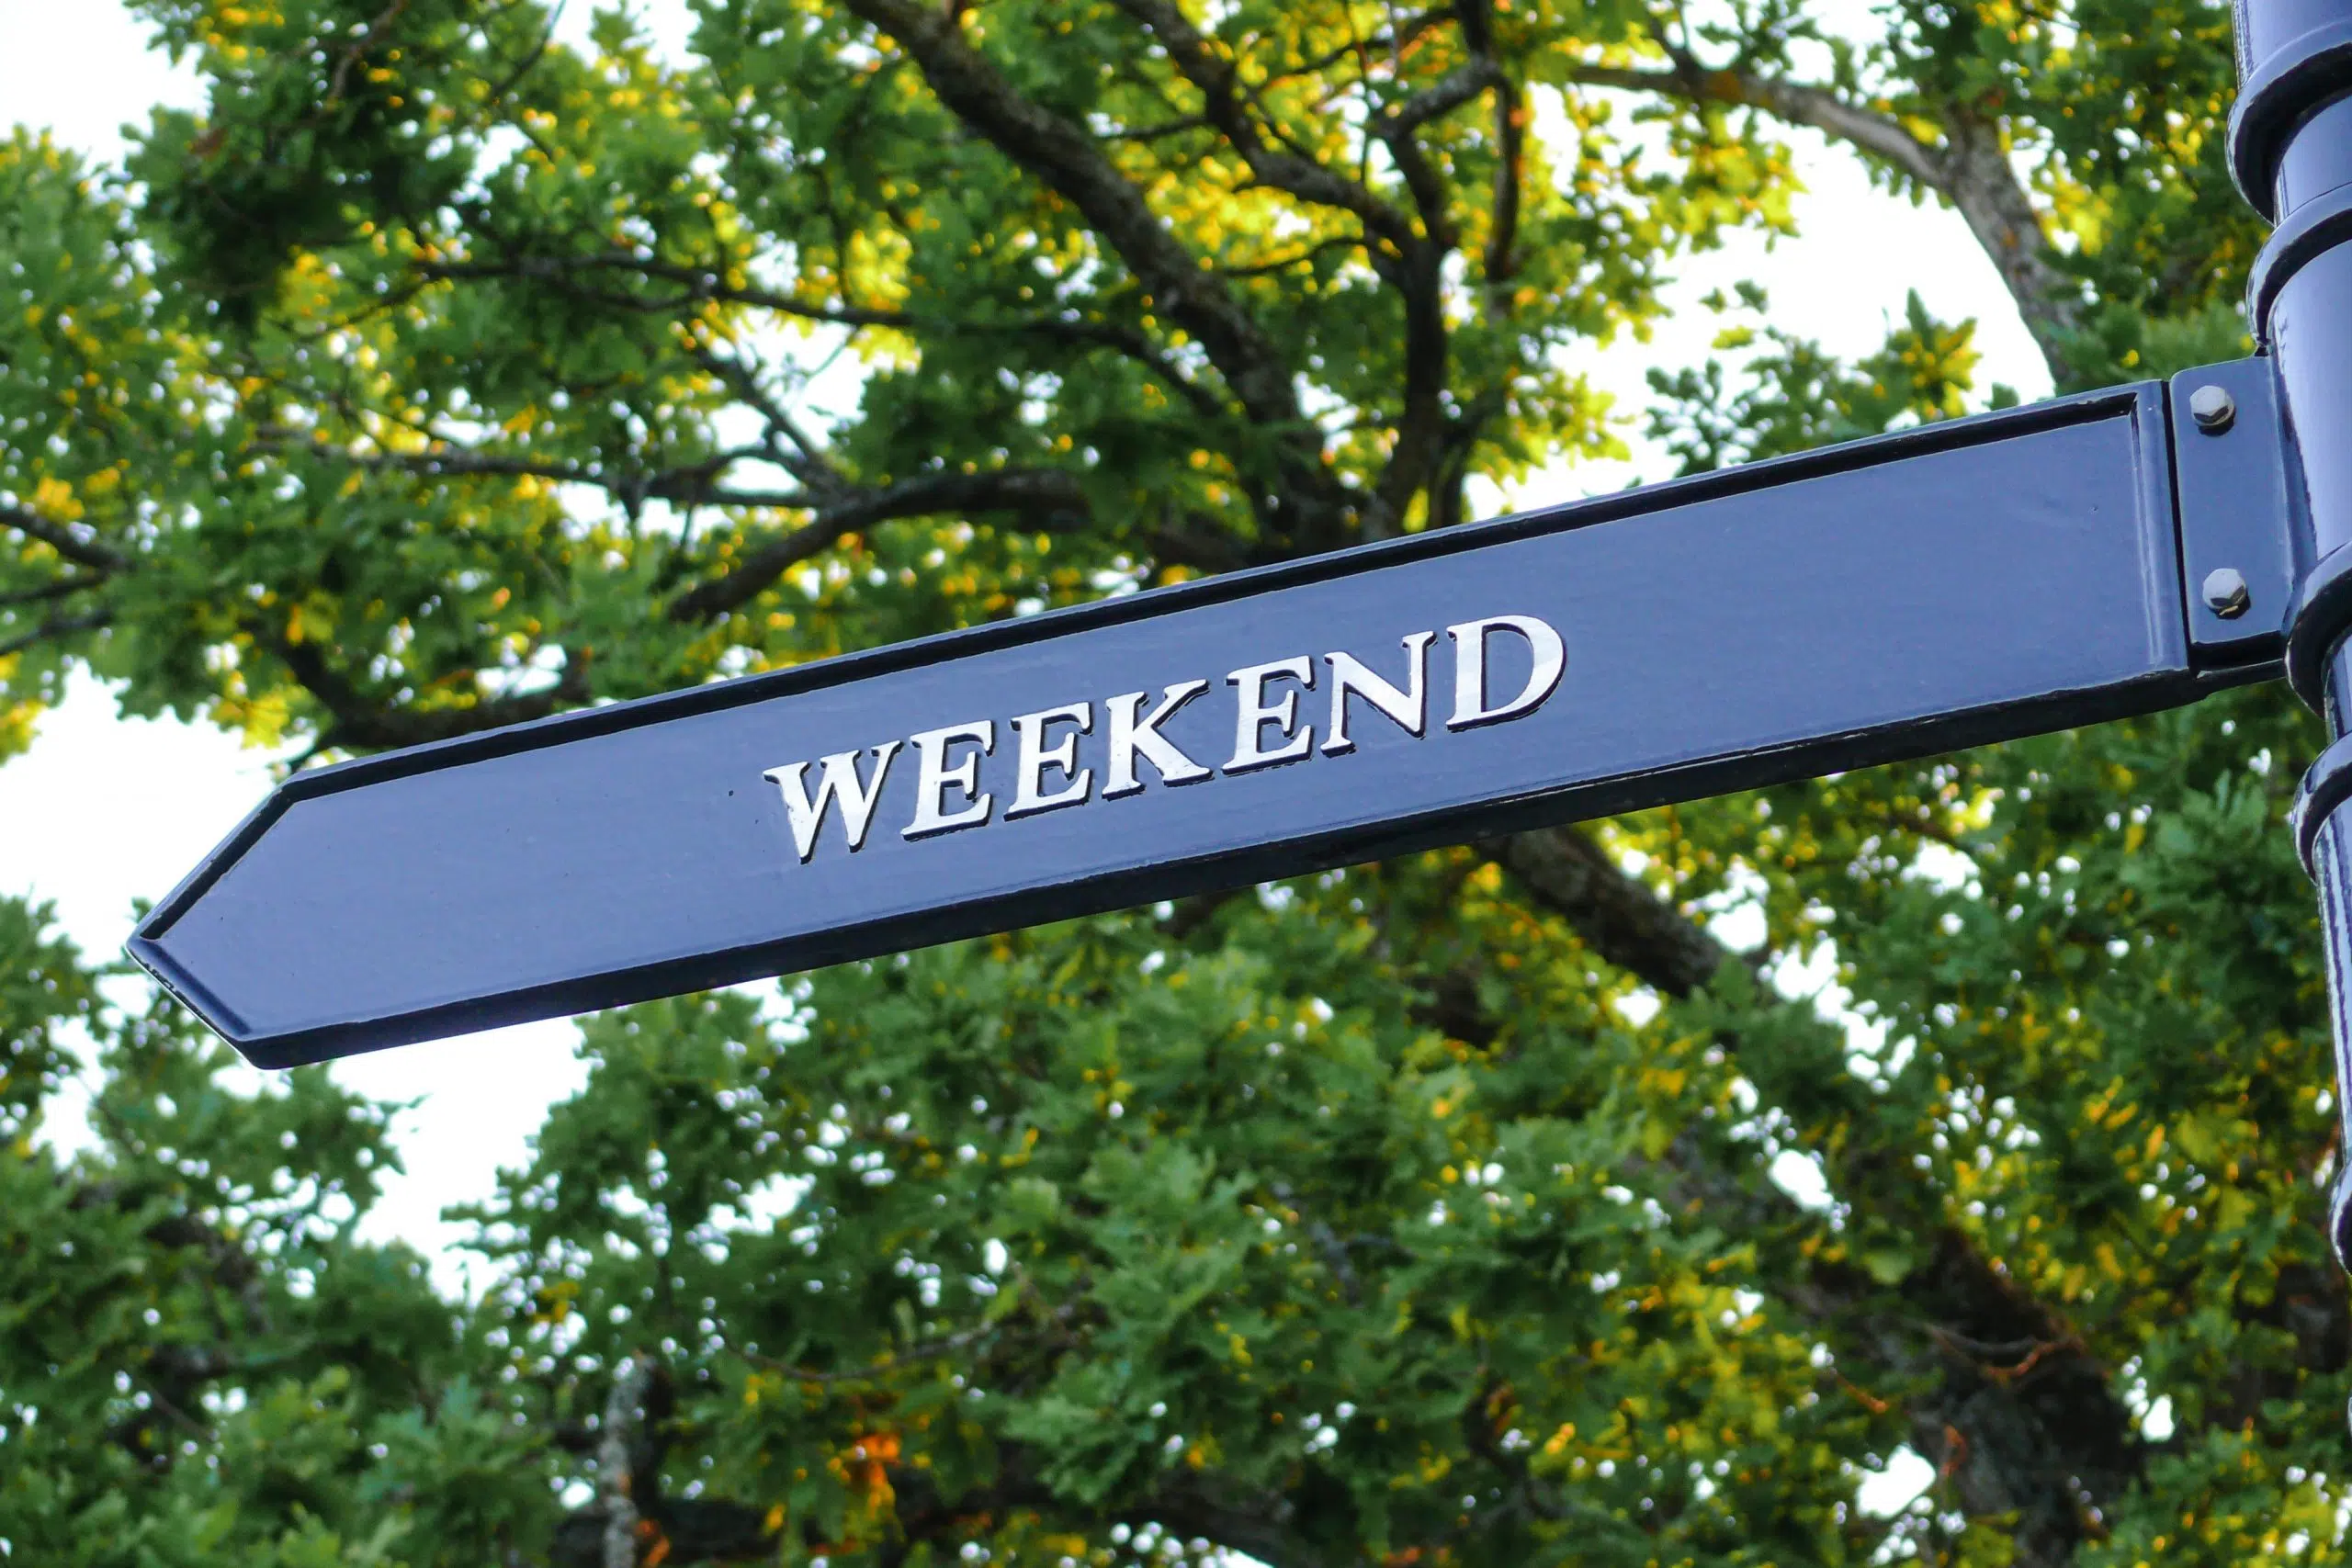 The Weekender - 3 Things To Do Around The Region